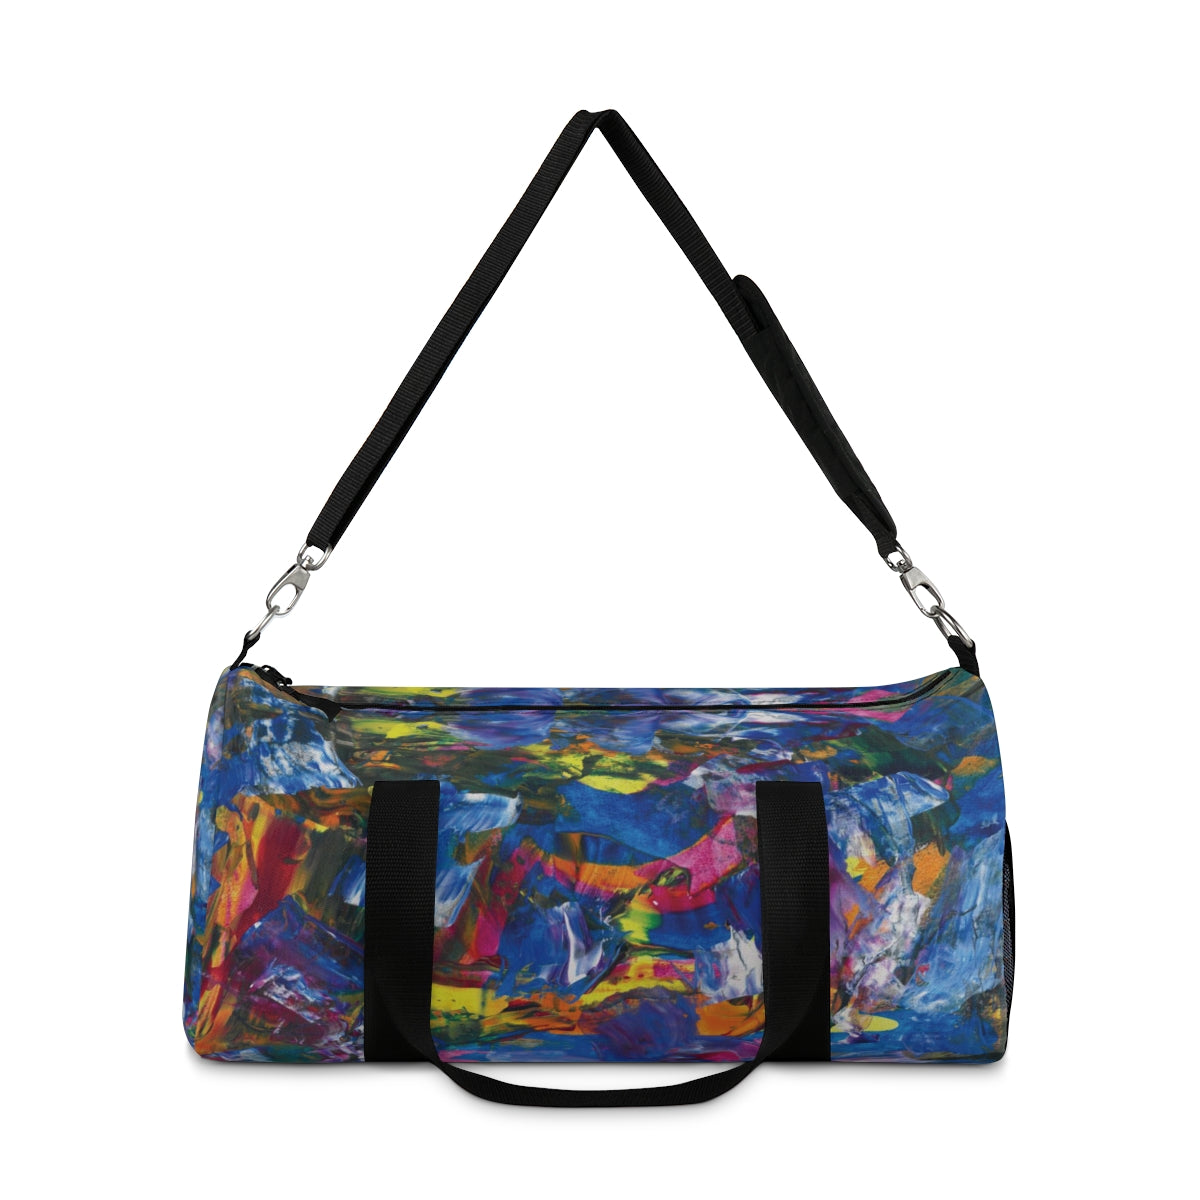 duffle bag with swirls of colors